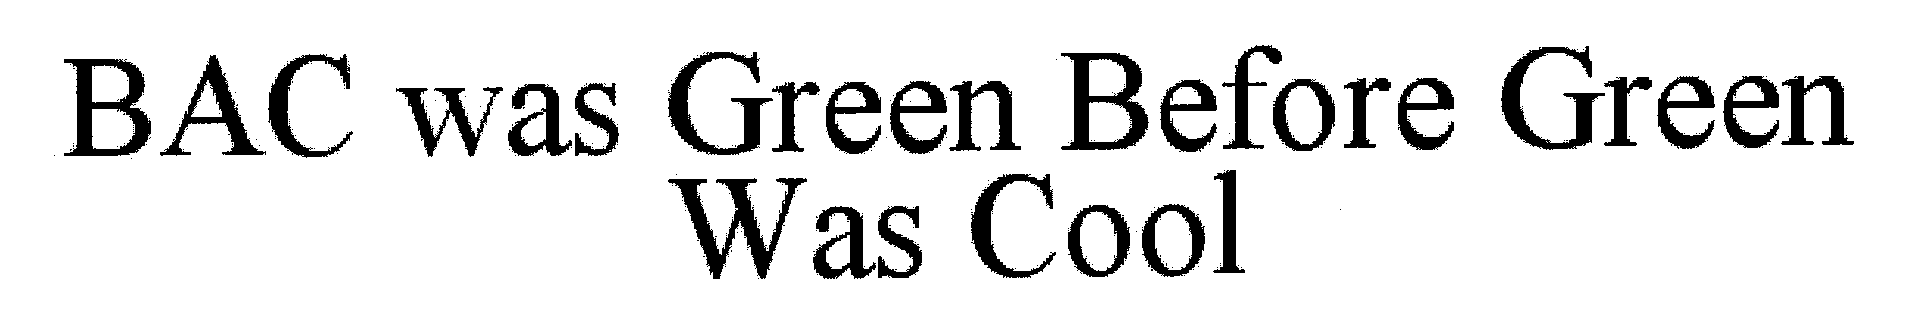  BAC WAS GREEN BEFORE GREEN WAS COOL